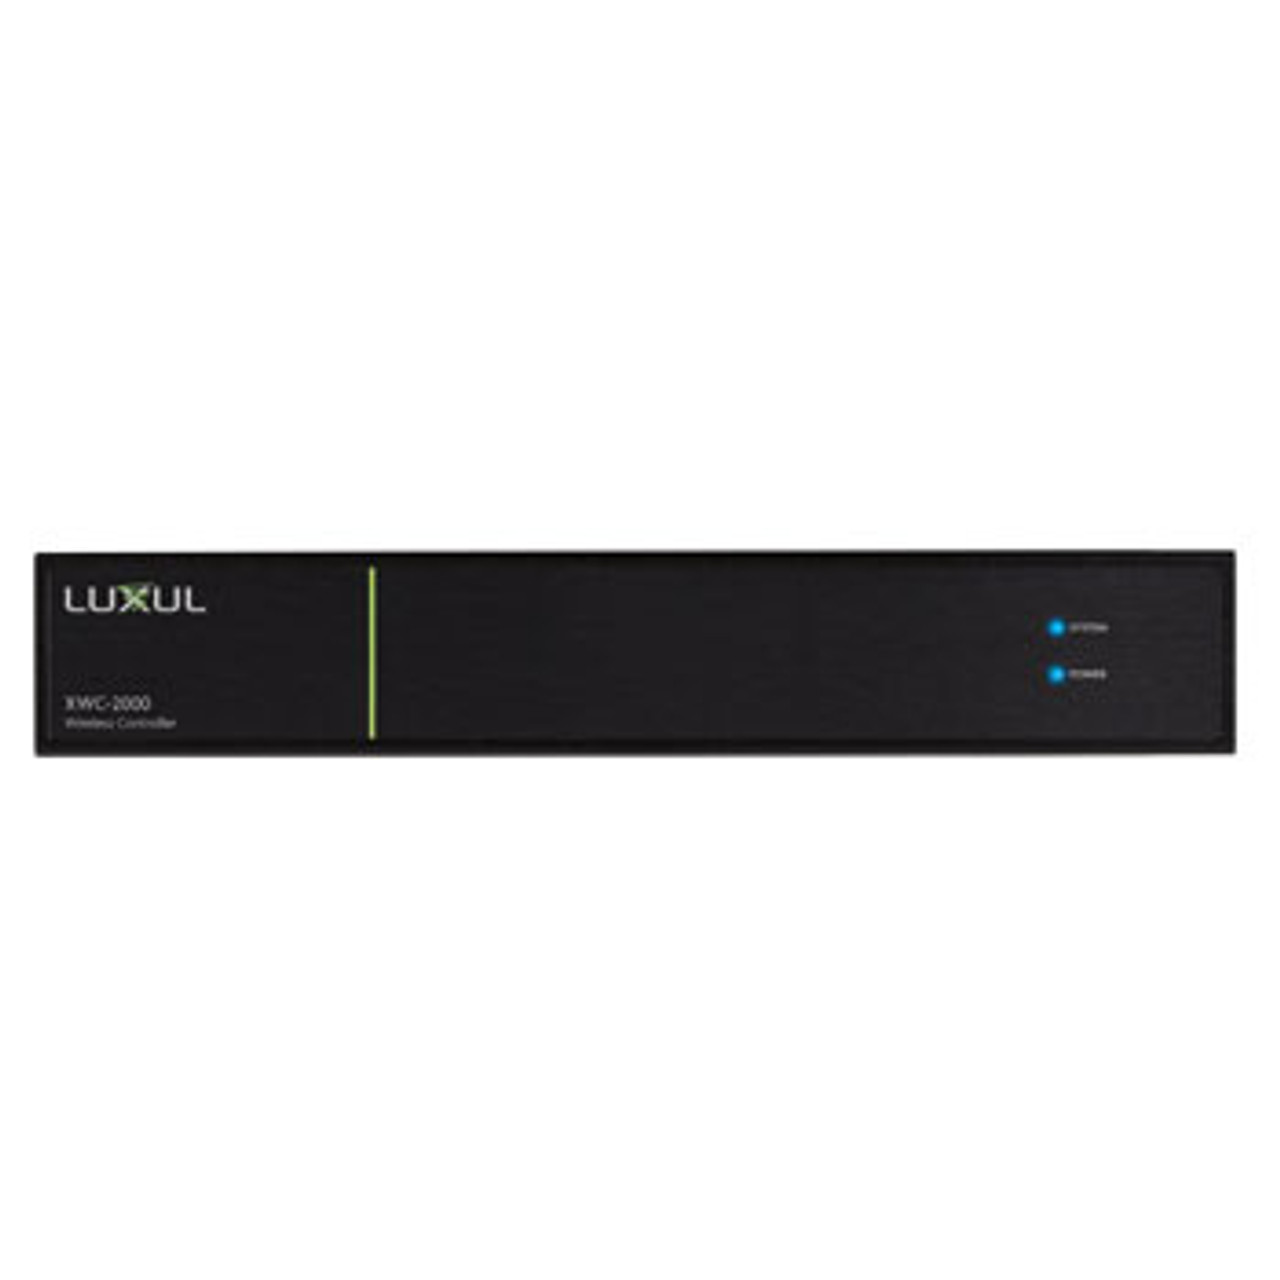 Luxul XWC-2000 32 Wireless AP Controller